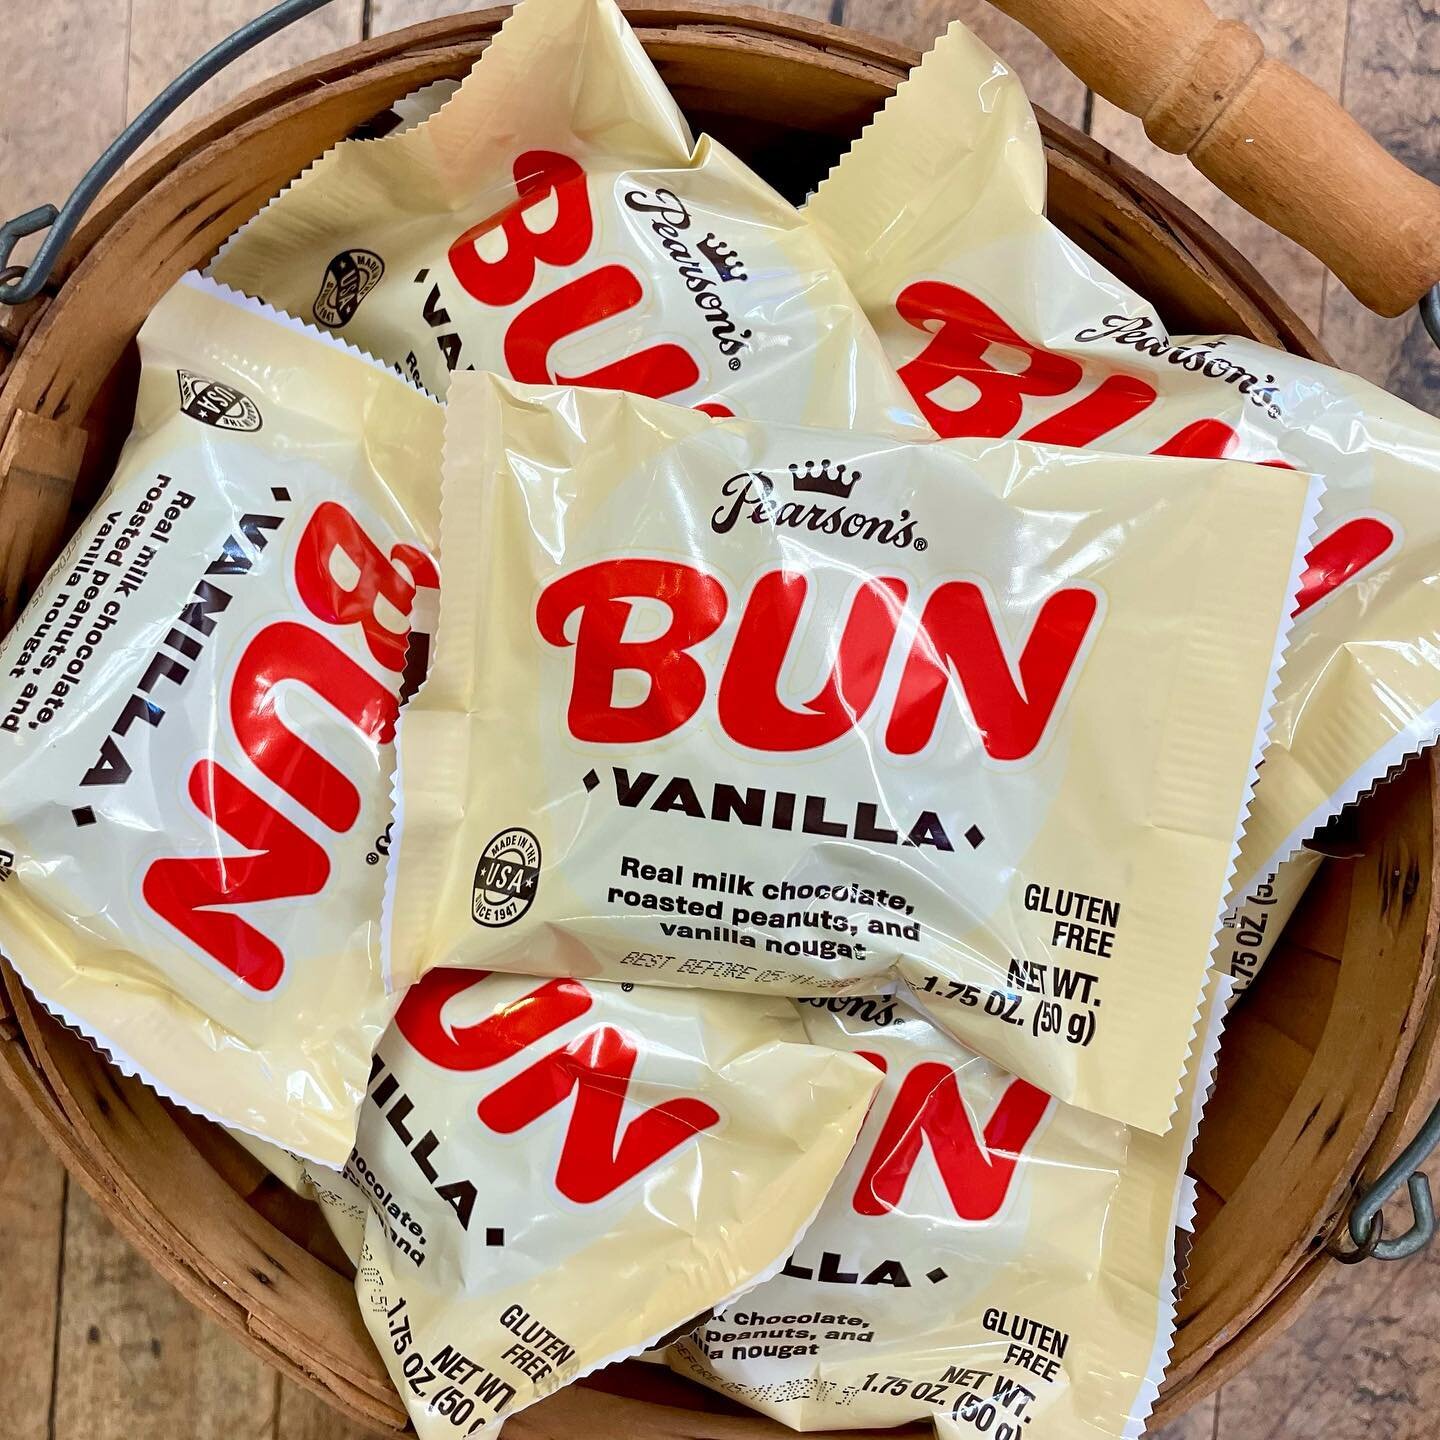 Get off your BUN and stop in The Candy Unicornium!!! Open until 5:00pm always bringing you New and Retro Candies!!!! #TheCandyUnicornium #CandyShoppe #CandyStore #candyCandy #candy #bun #vanilla #roastedpeanuts #discoverelizabethtown #loveetown